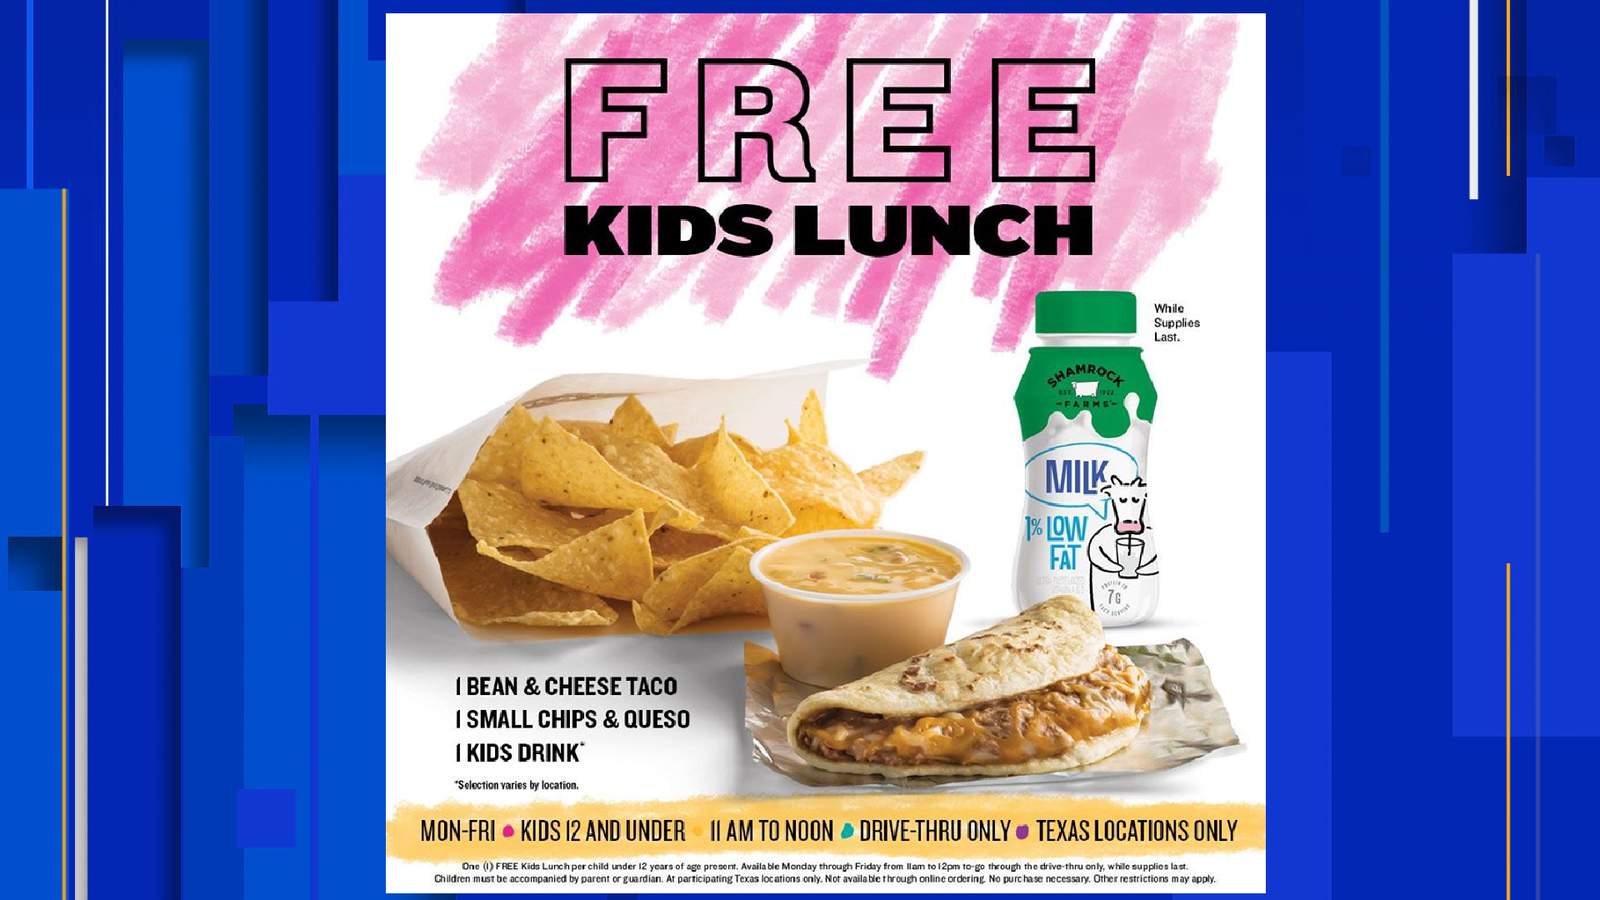 Taco Cabana offers free lunch for kids all summer long, no purchase necessary